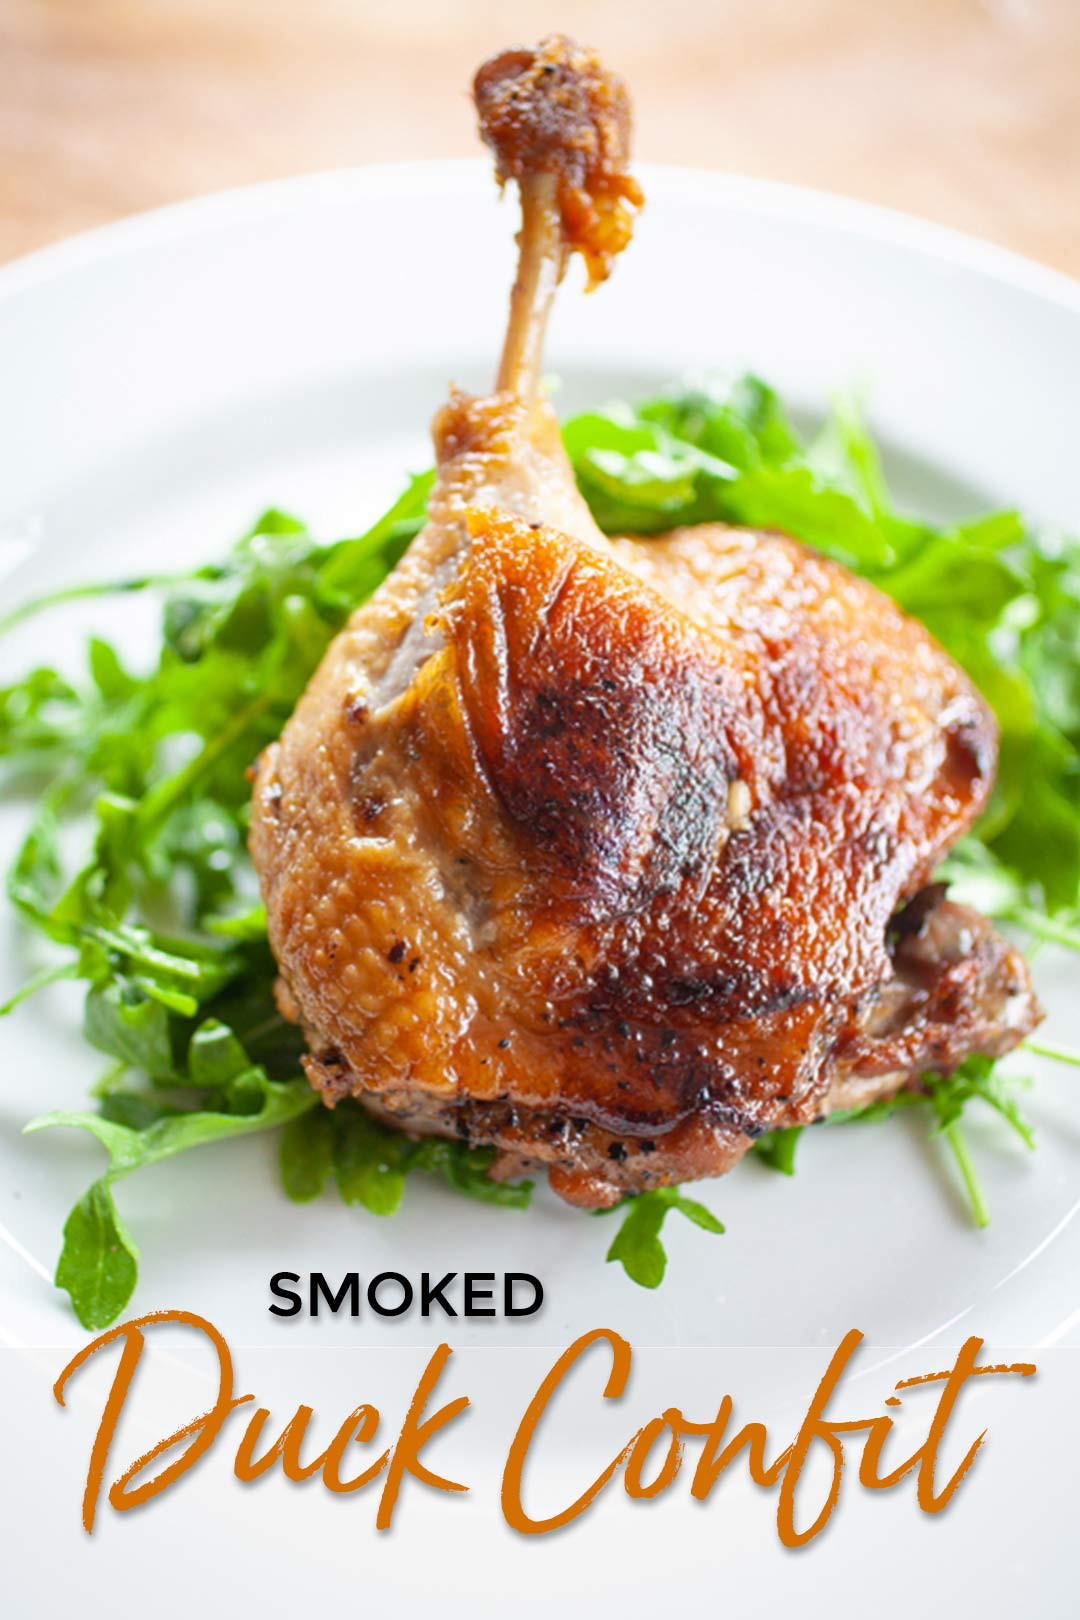 Recipes For Duck Confit
 Smoked Duck Confit